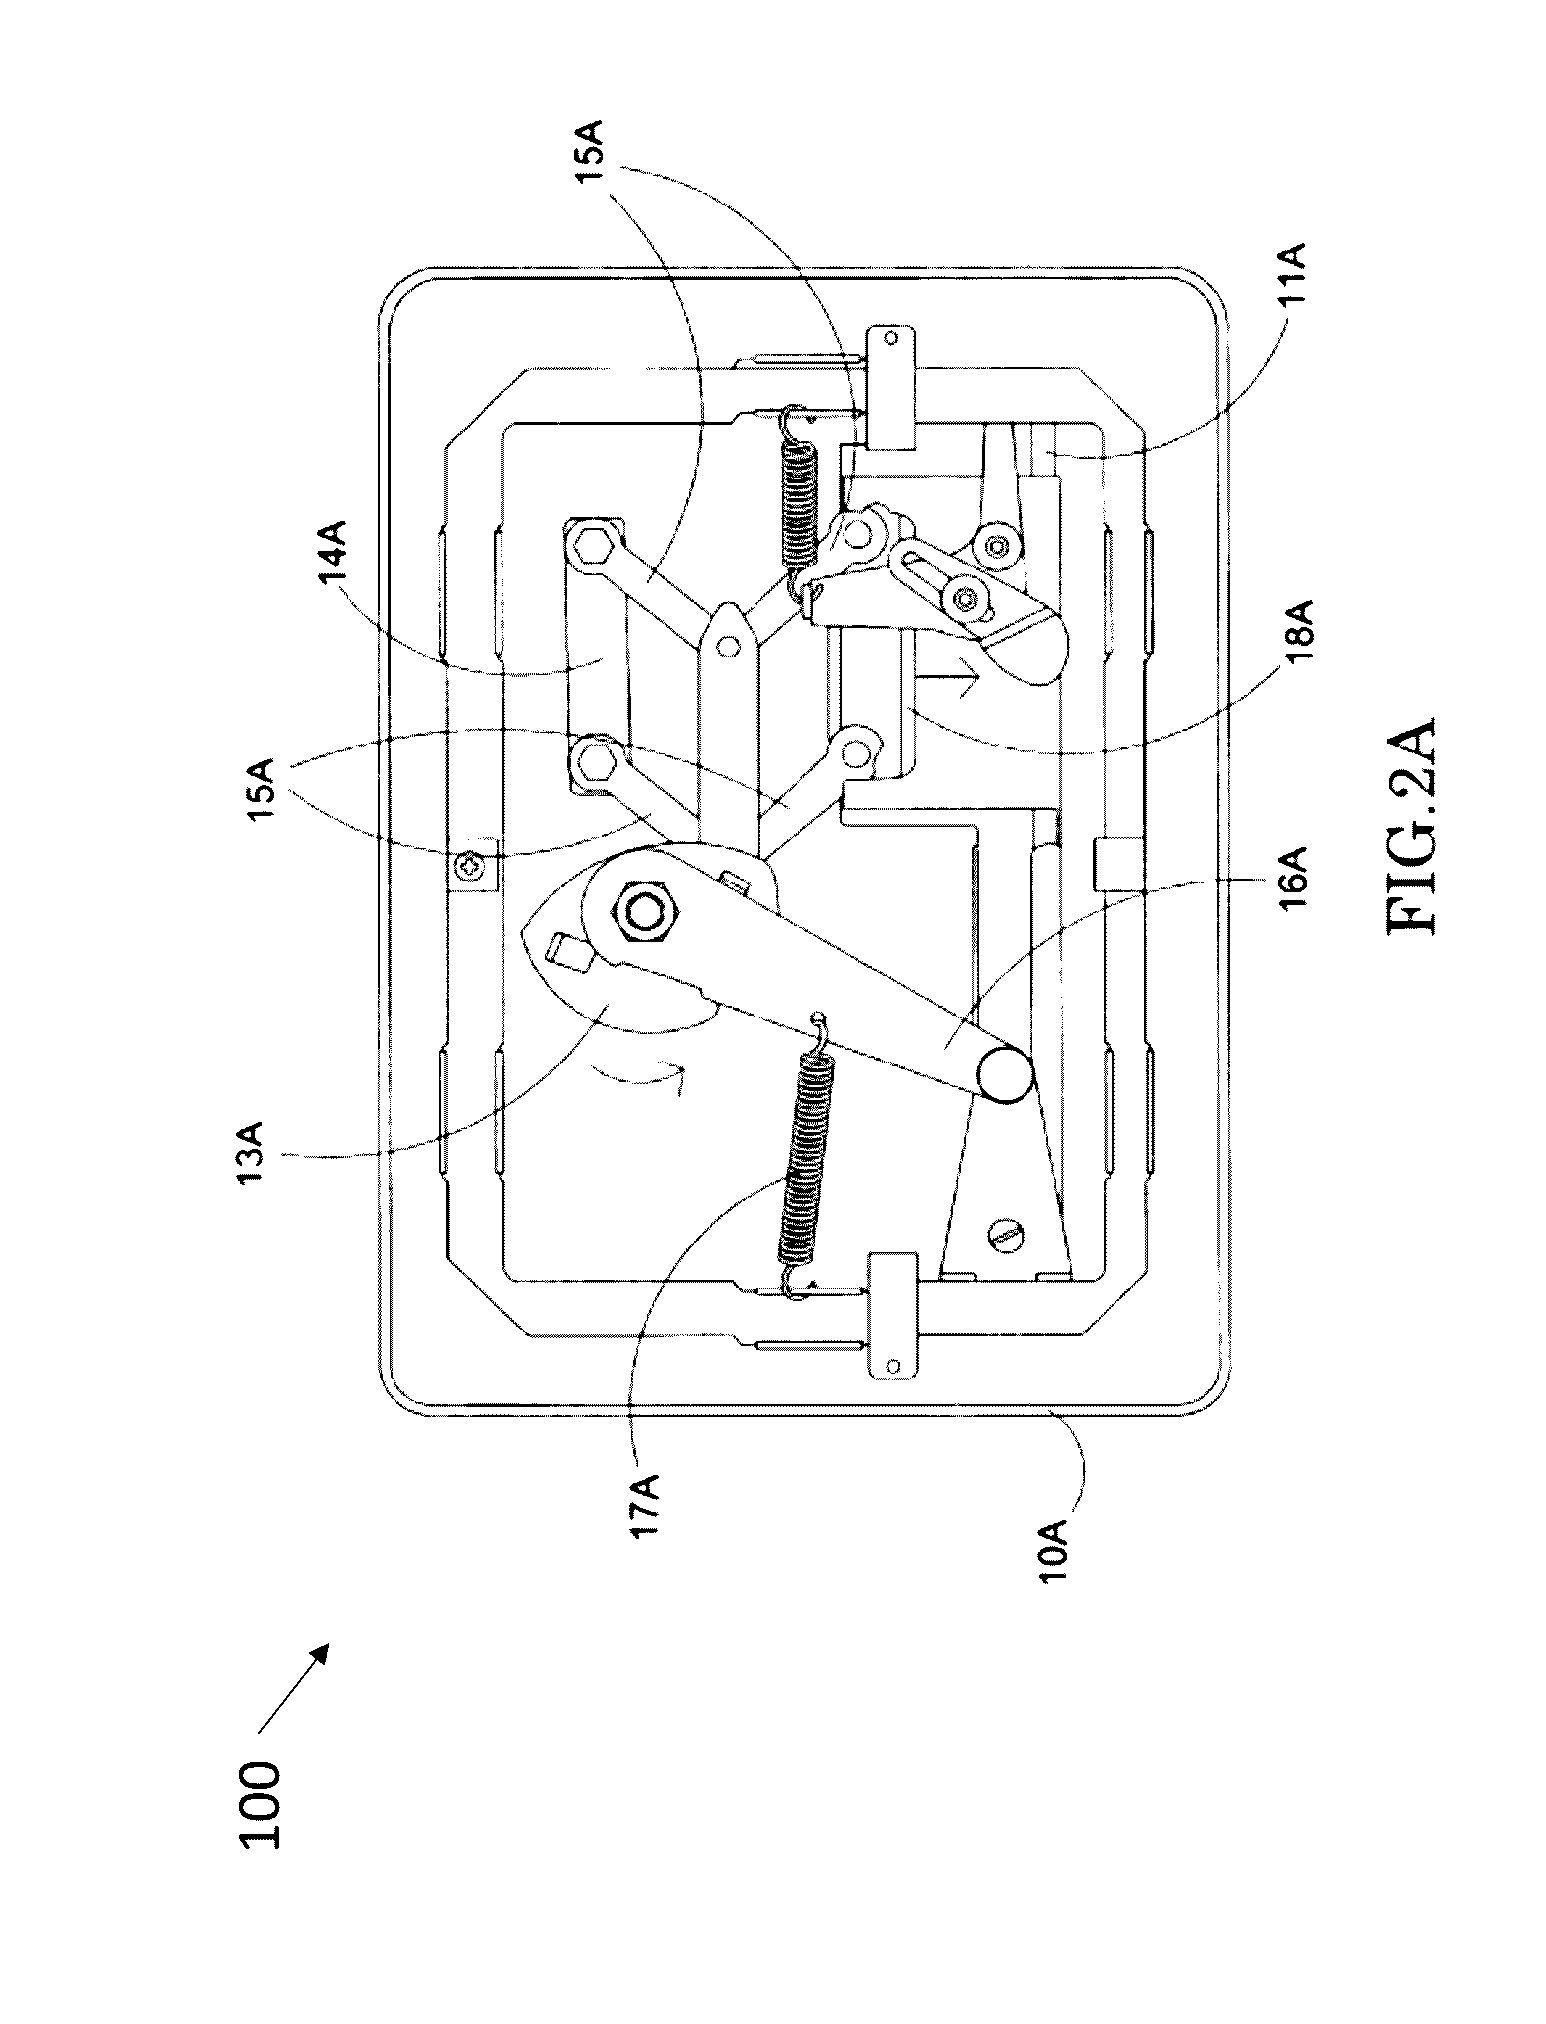 Apparatus, systems and methods for rotational drive modules for use with cigarette tobacco filling devices